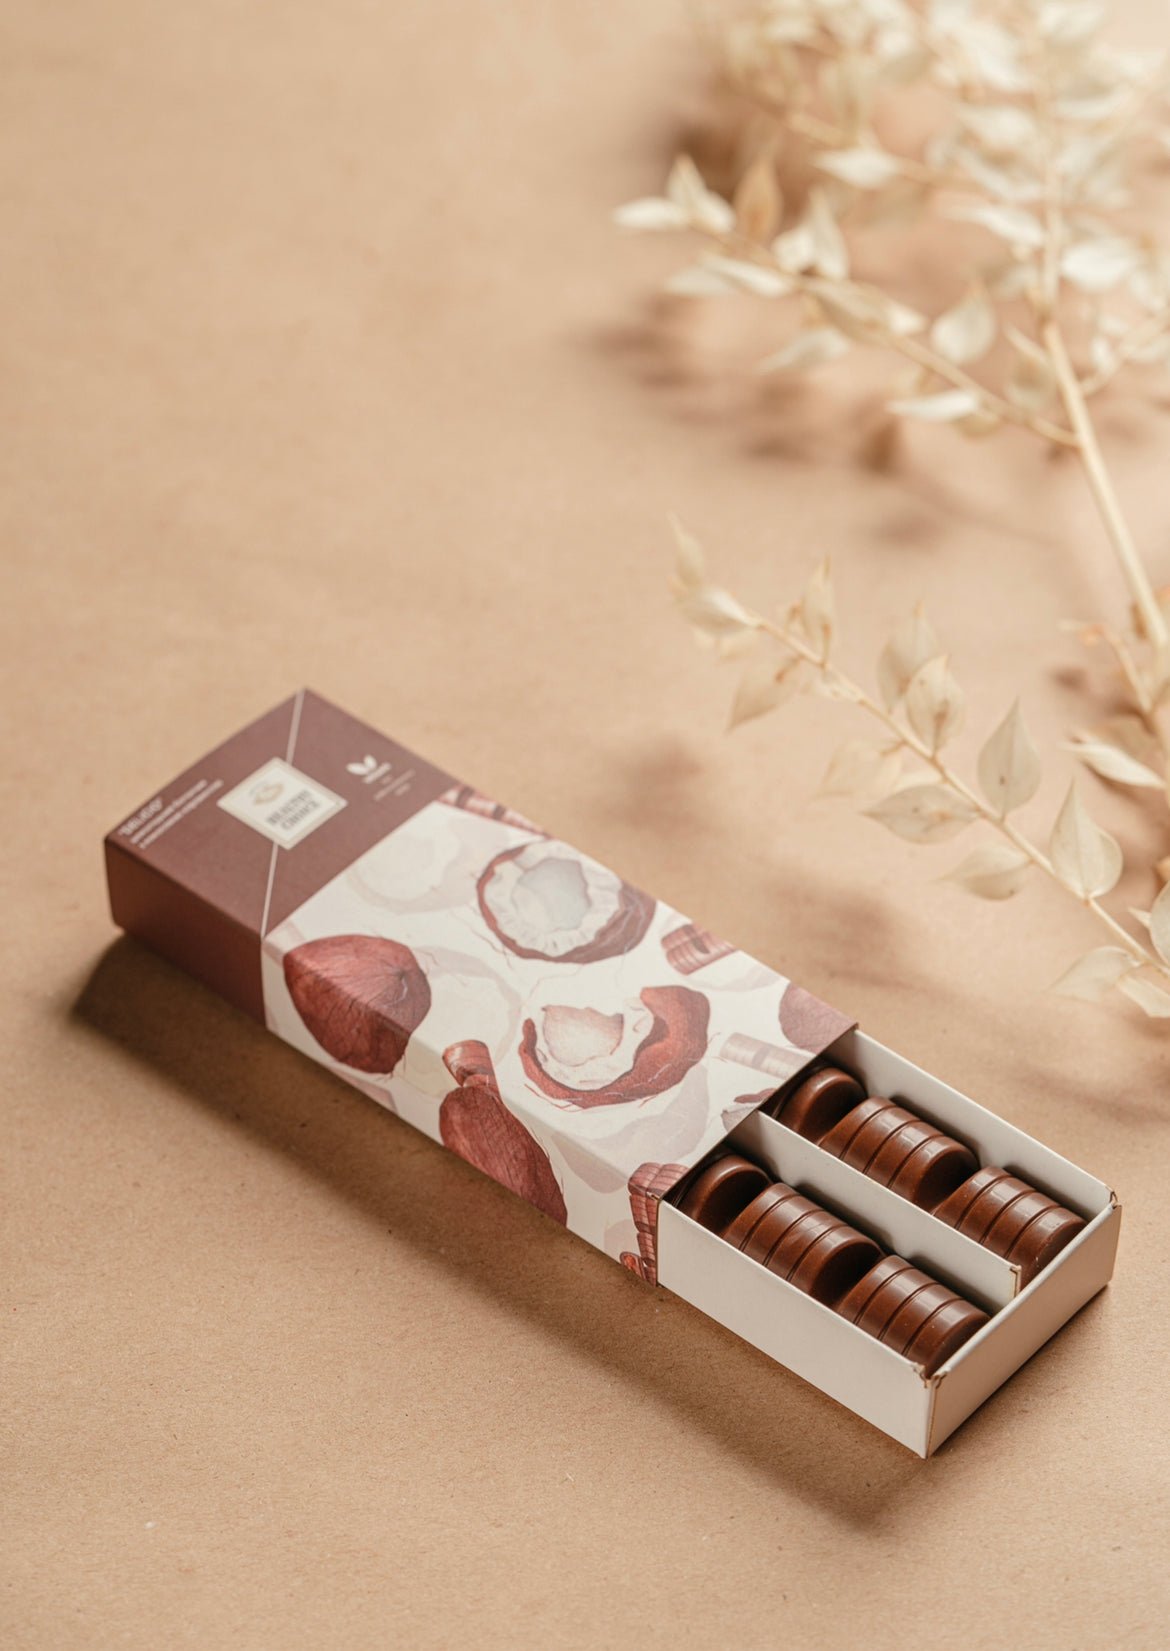 Chocolate bar with caramel and nuts - Beauty Matters